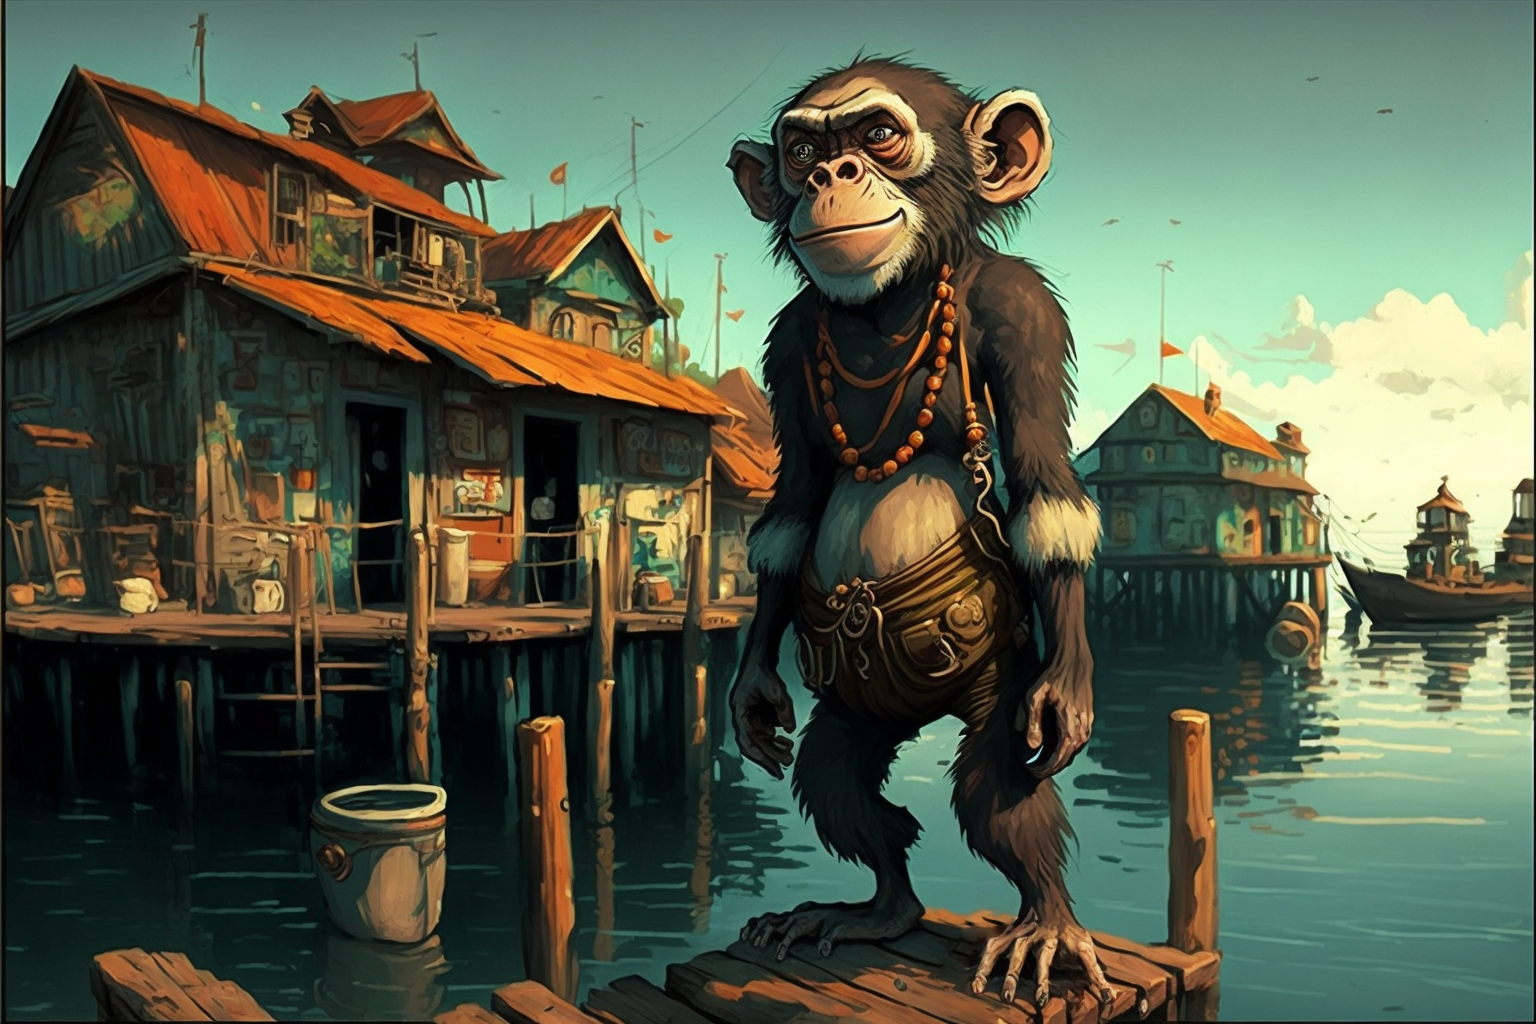 Kong the Protector: A Story of Intelligence, Kindness, and Community